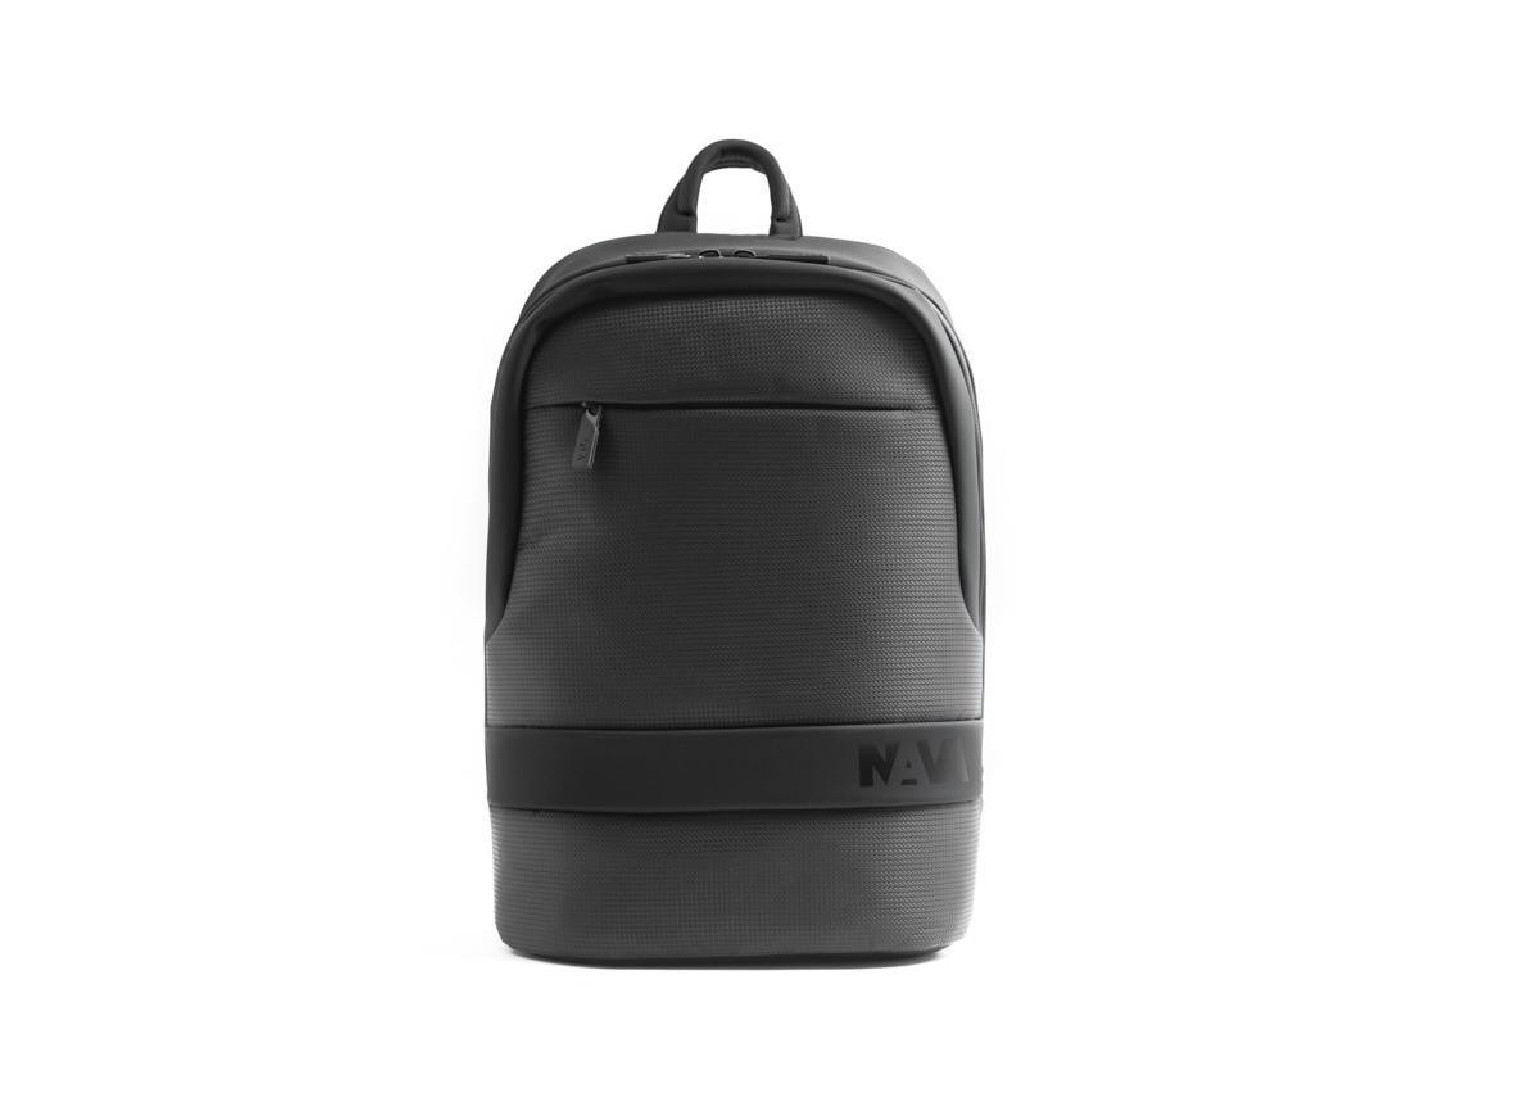 NAVA EASY ADVANCE ORGANIZED BACKPACK 2 COMPARTMENTS BLACK GREY